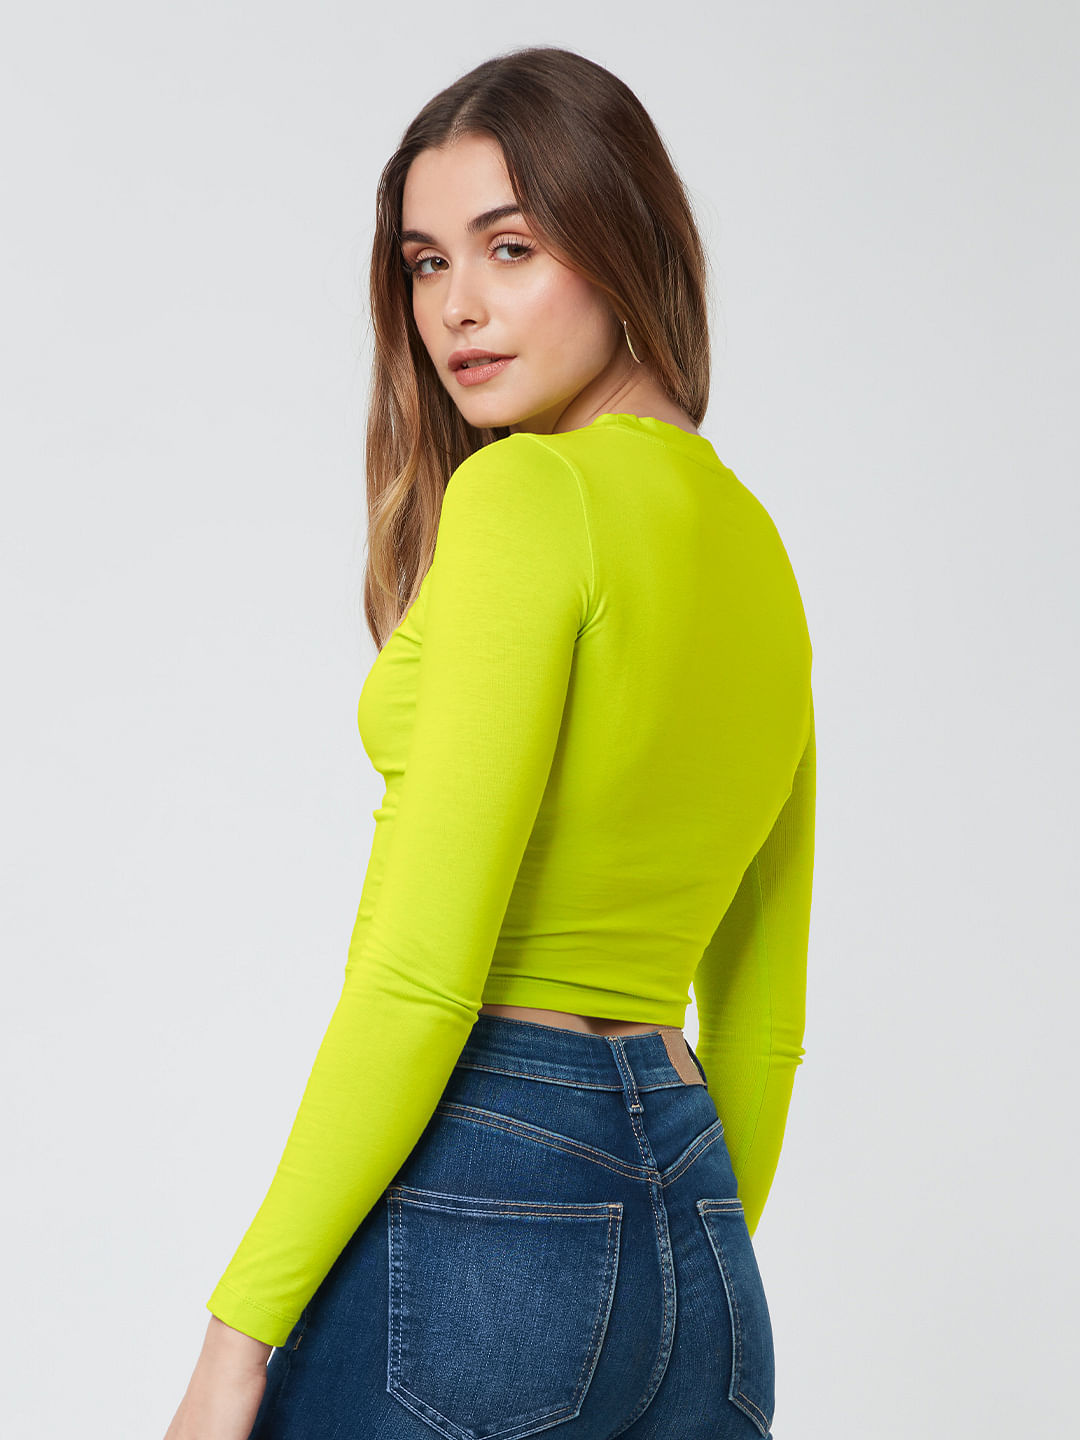 Buy Solids: Lime Green Women's Cut Out Crop Top online at The Souled Store